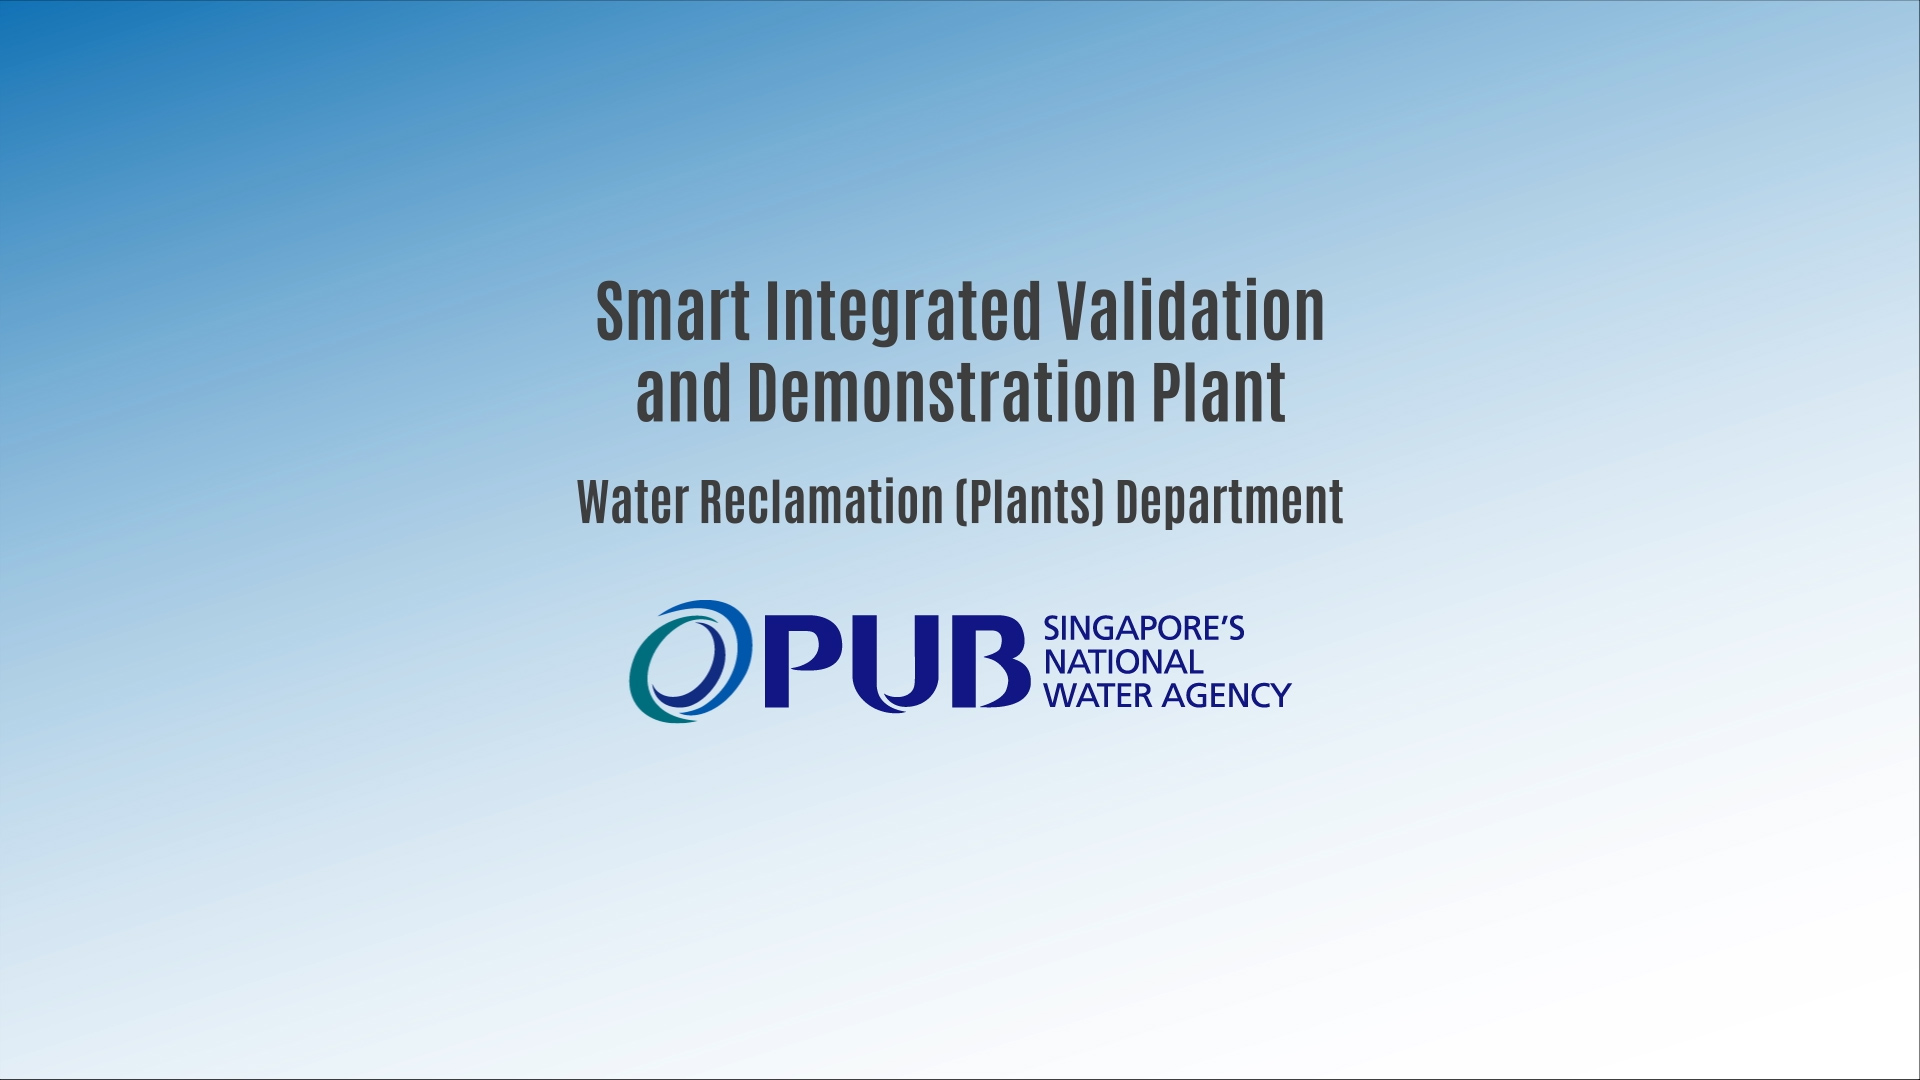 PUB Smart Integrated Validation and Demonstration Plant Overview